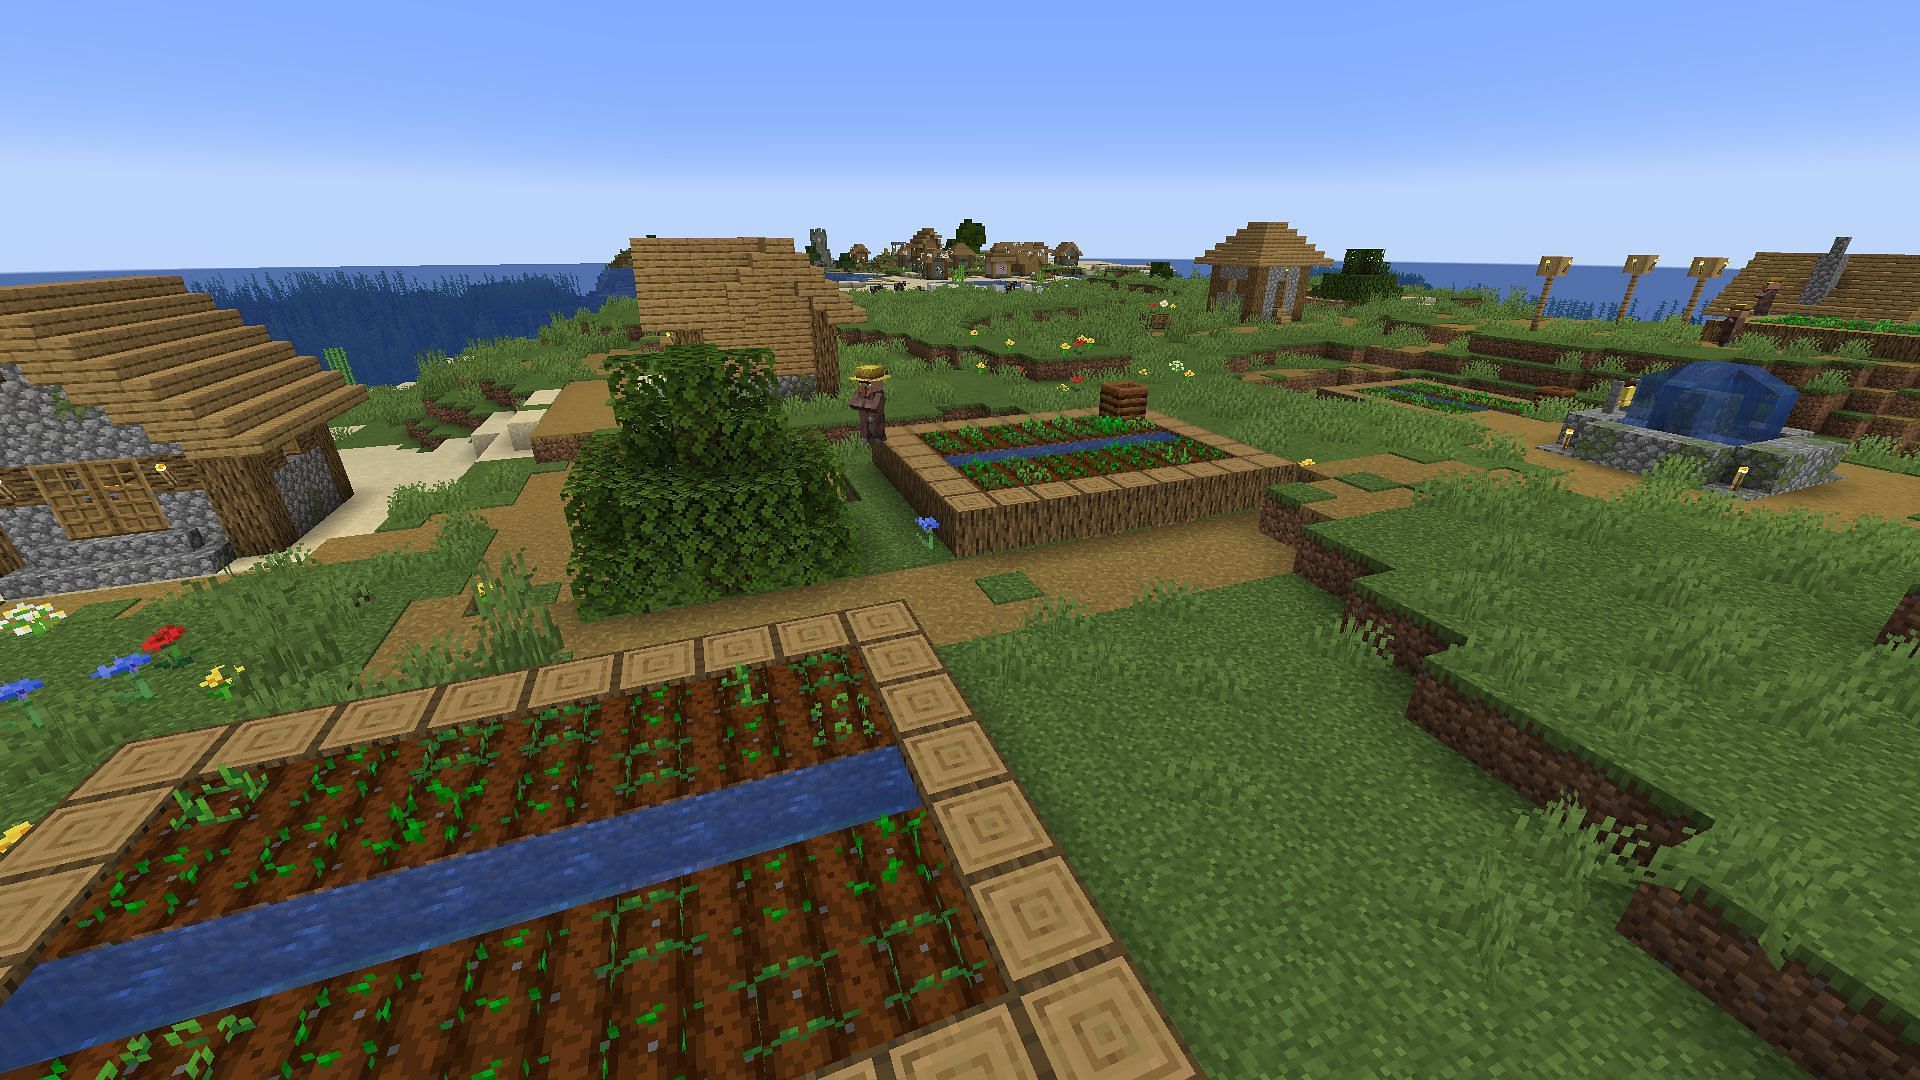 Both a standard village and an abandoned village lie in wait in this Minecraft island seed (Image via Mojang)